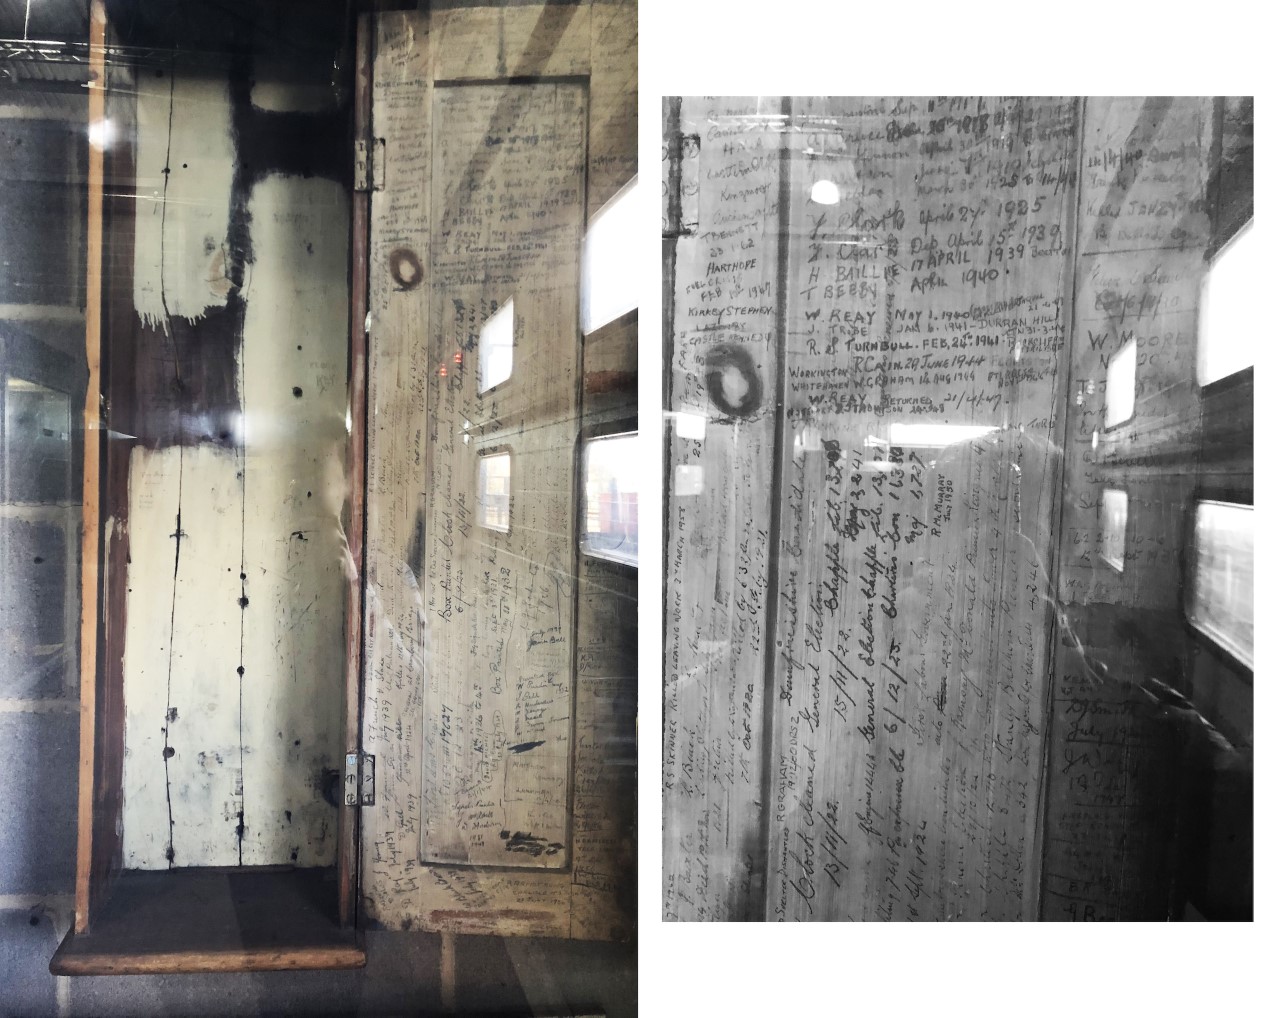 two photos of an aged wooden upright box, with inscriptions - photo taken with the object behind glass, which reflects indications of a store interior